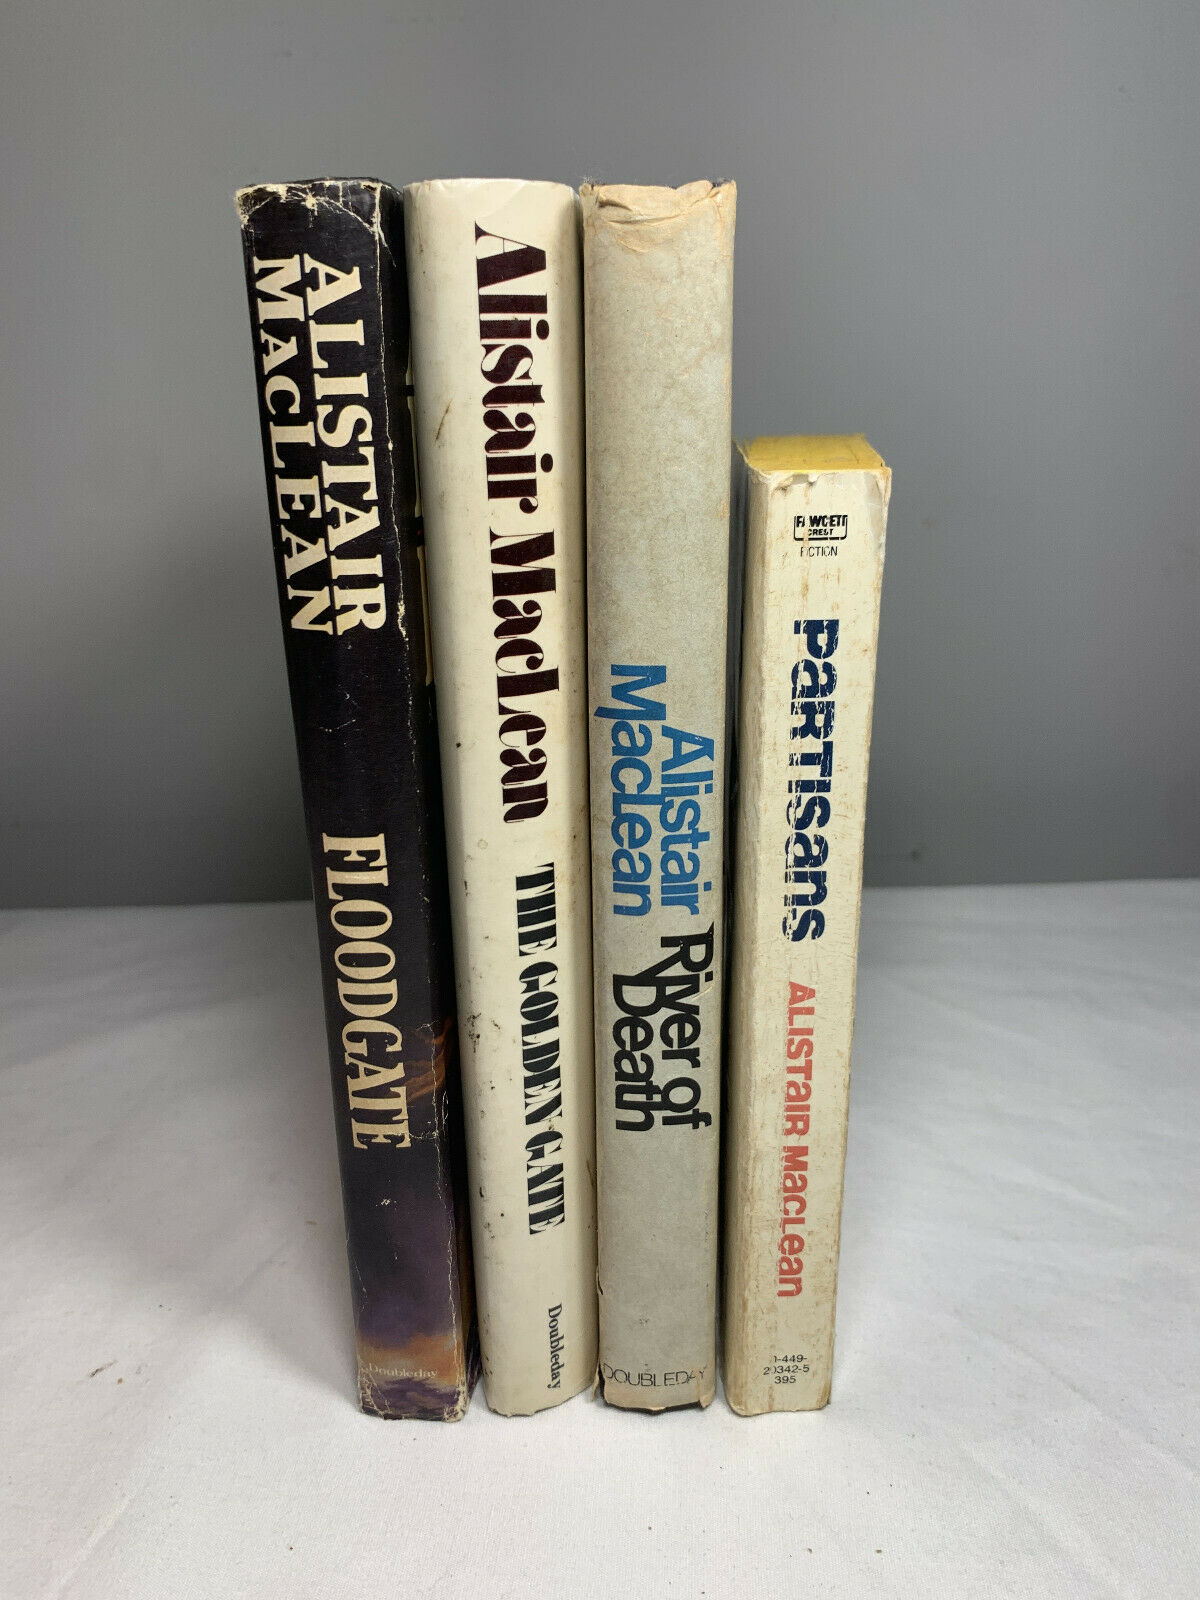 Lot of 3 Alistair MacLean Hardcover Books Floodgate, Golden Gate, River of Death